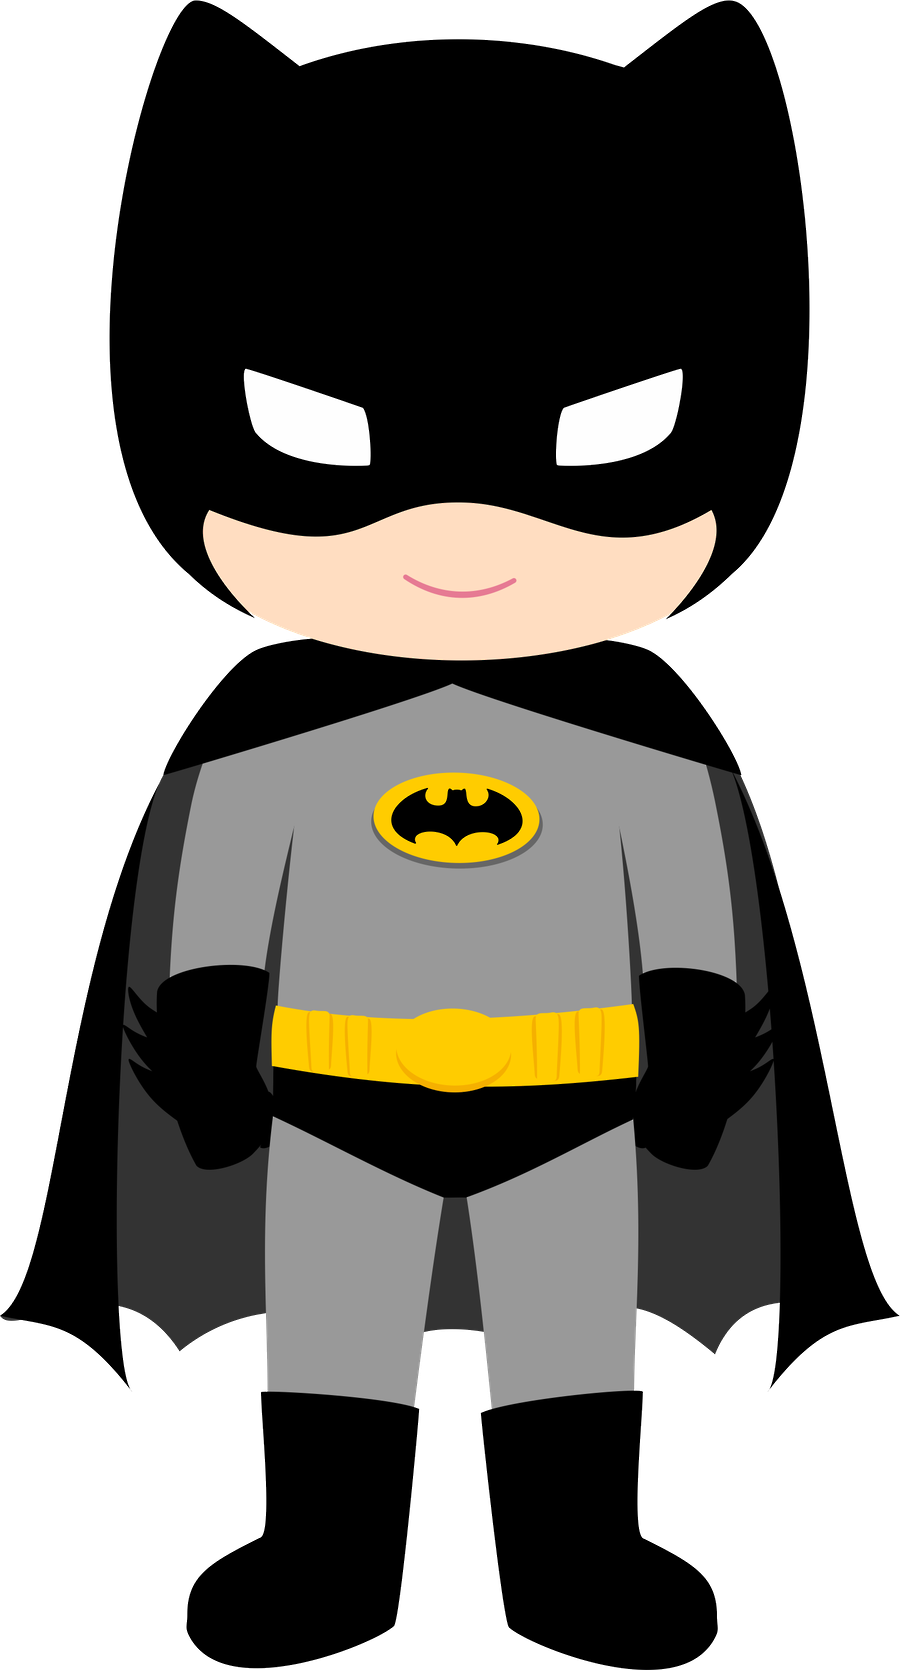 Super images image group. Hero clipart cartoon